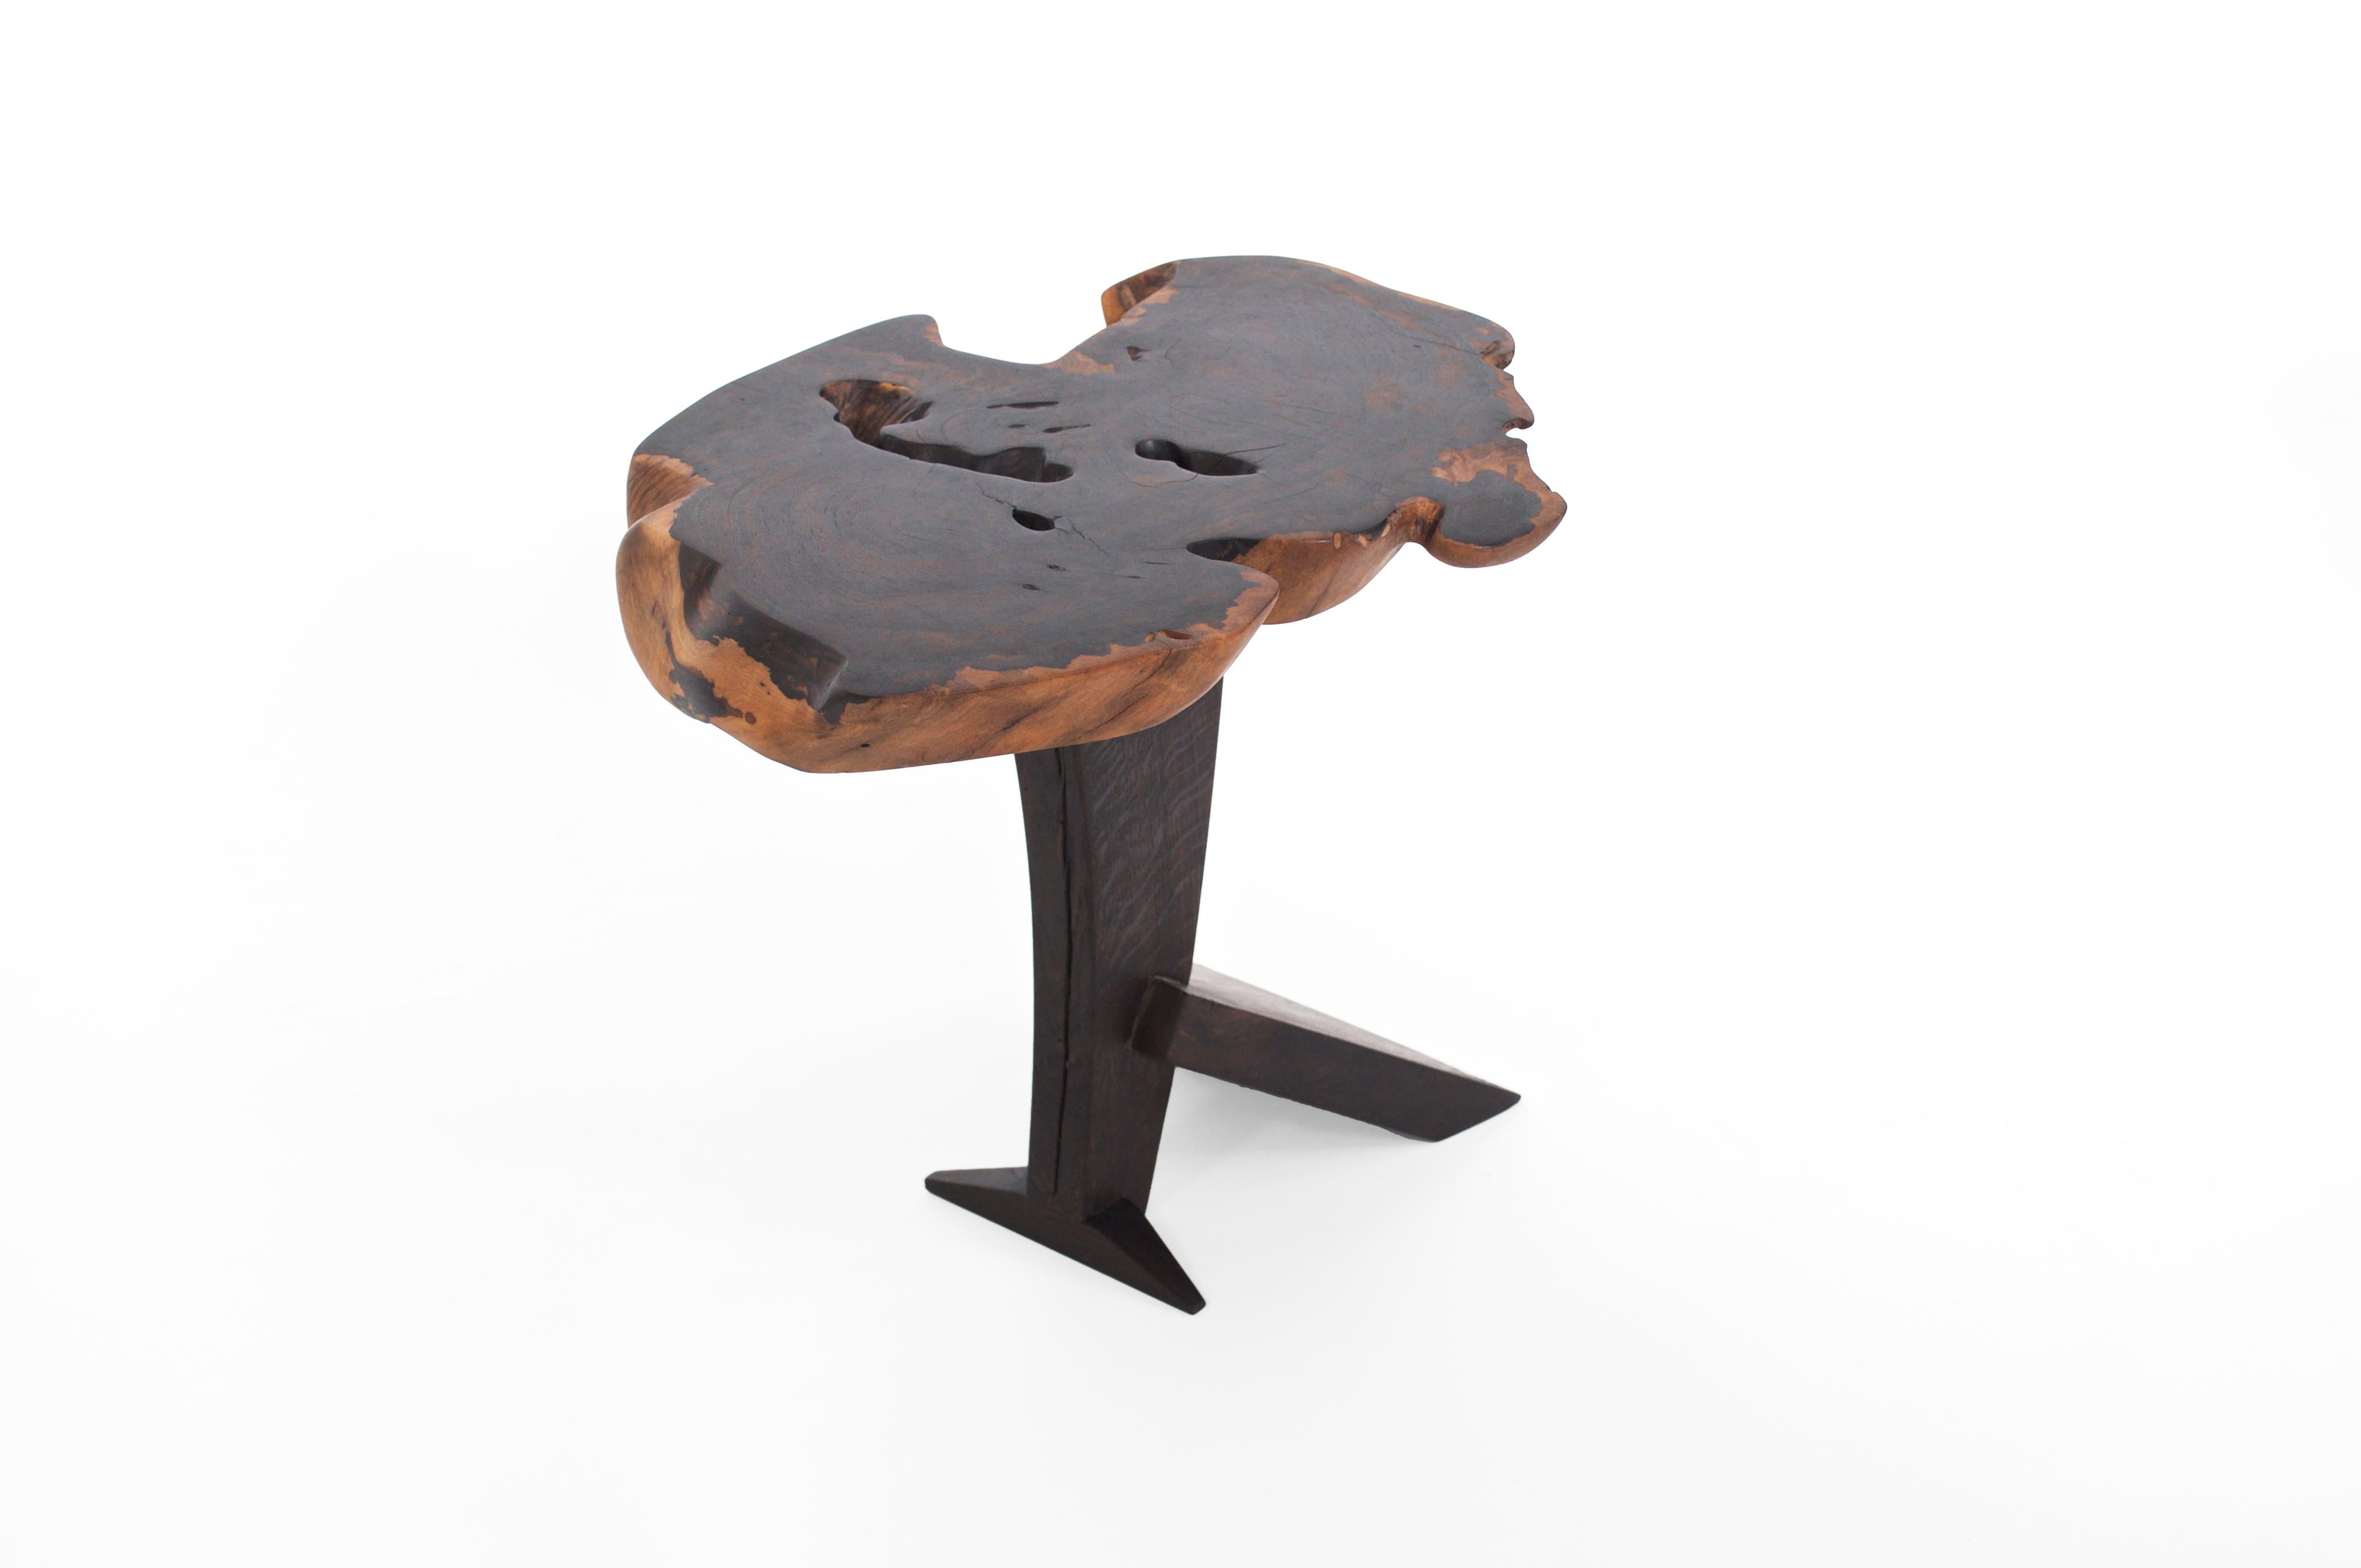 Unique Bog oak signed table by Jörg Pietschmann T2551 
Materials: Zirikote, Bog oak, polished oil finish
Measures: H 42 x W 50 x D 42 cm 


In Pietschmann’s sculptures, trees that for centuries were part of a landscape and founded in primordial